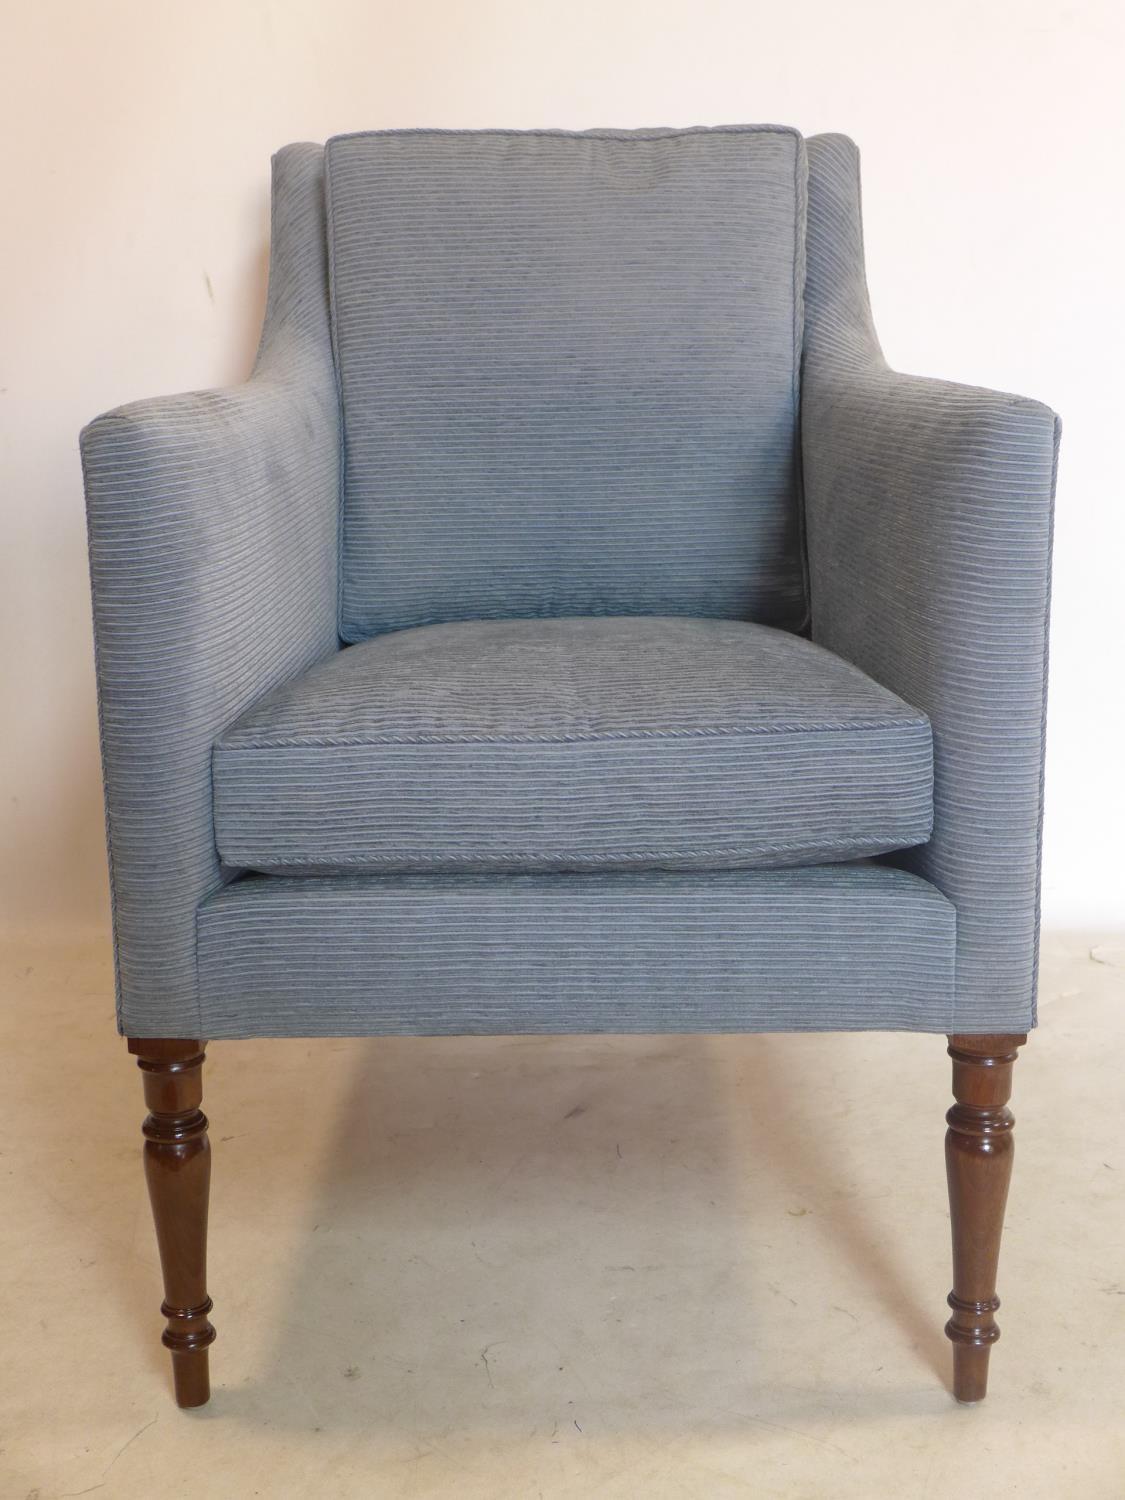 A Regency style armchair with blue corduroy upholstery, raised on turned legs